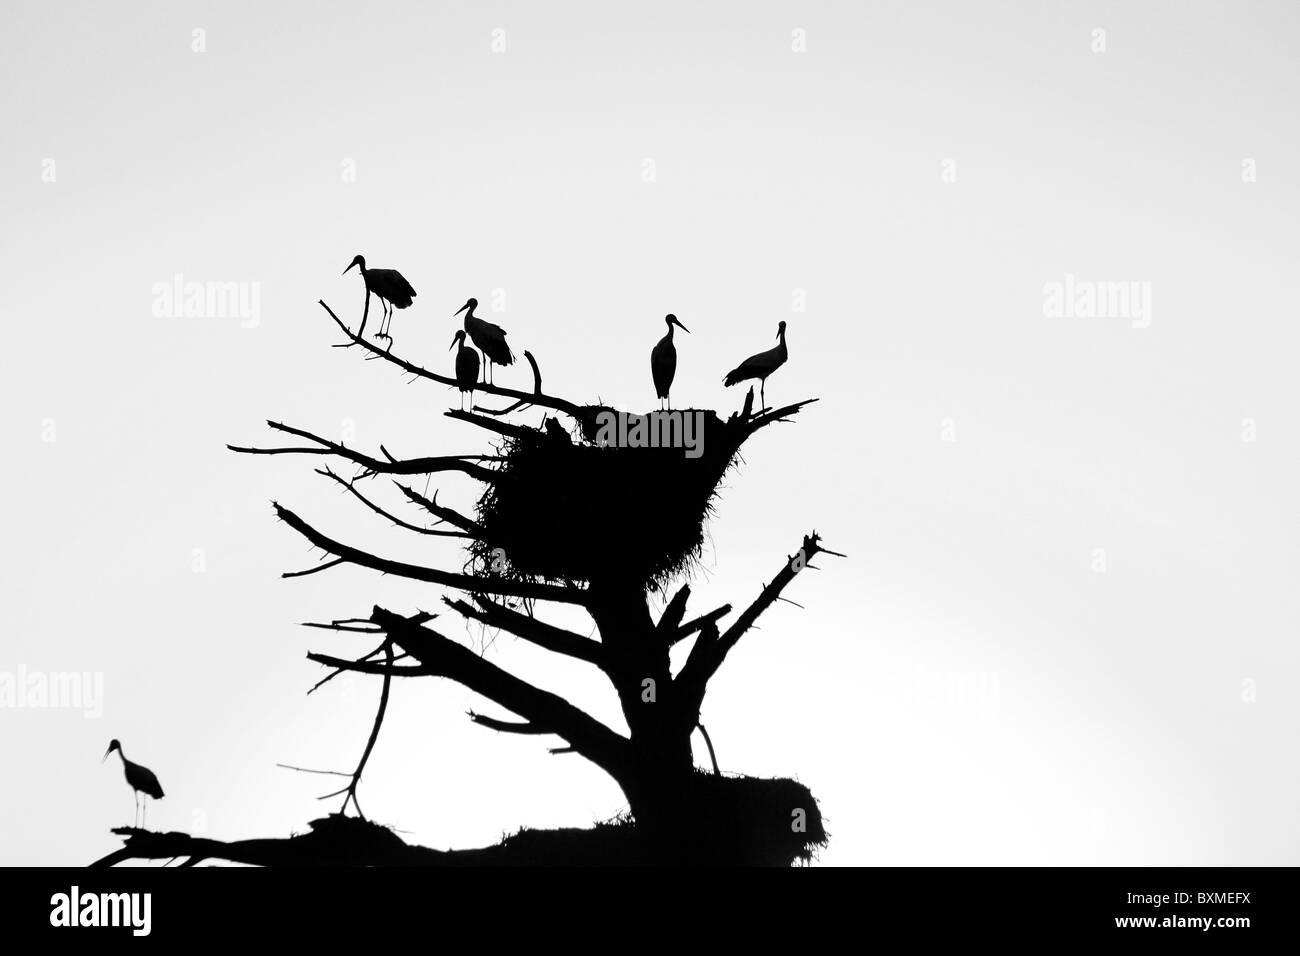 Bunch of stork birds silhouettes on a dead tree with nest at sunset. Stock Photo